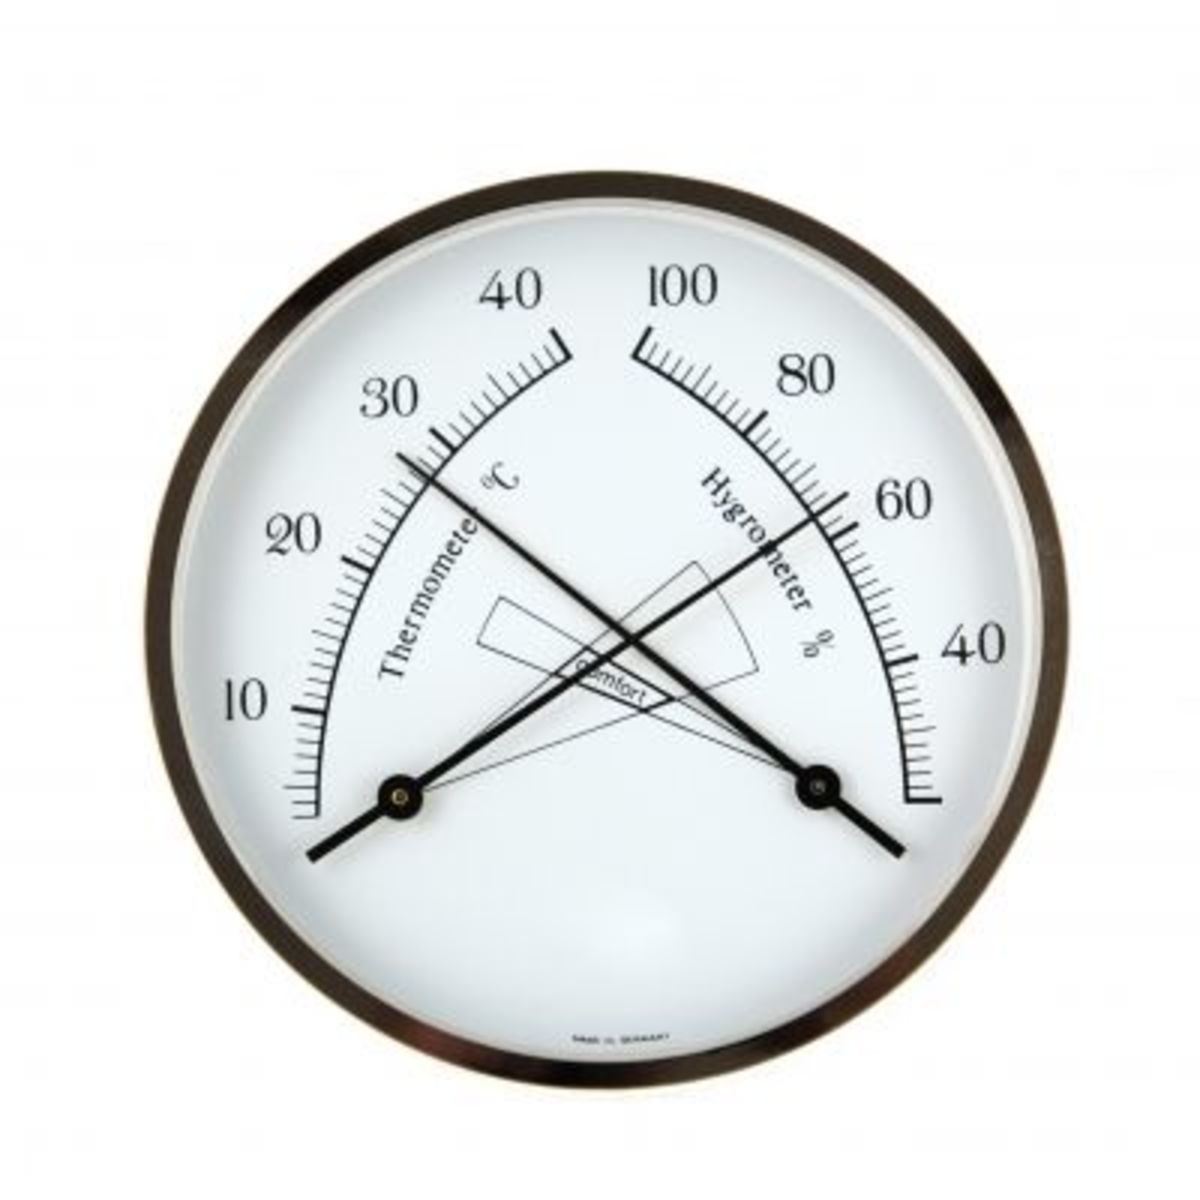 A hygrometer measures humidity